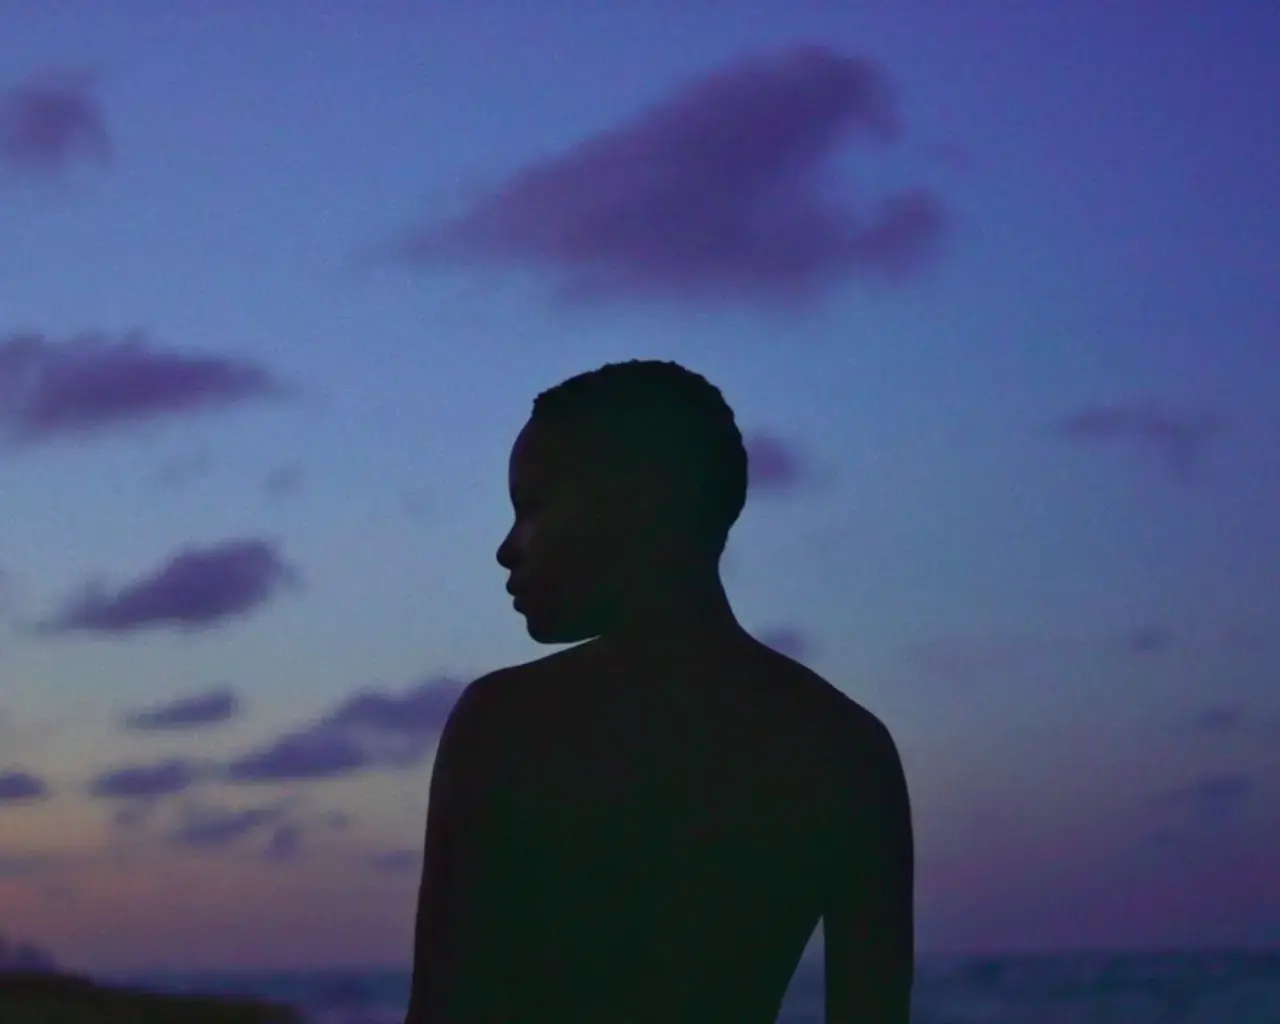 Terence Nance, film still from Swimming in Your Skin Again, 2014. Courtesy of Terence Nance.